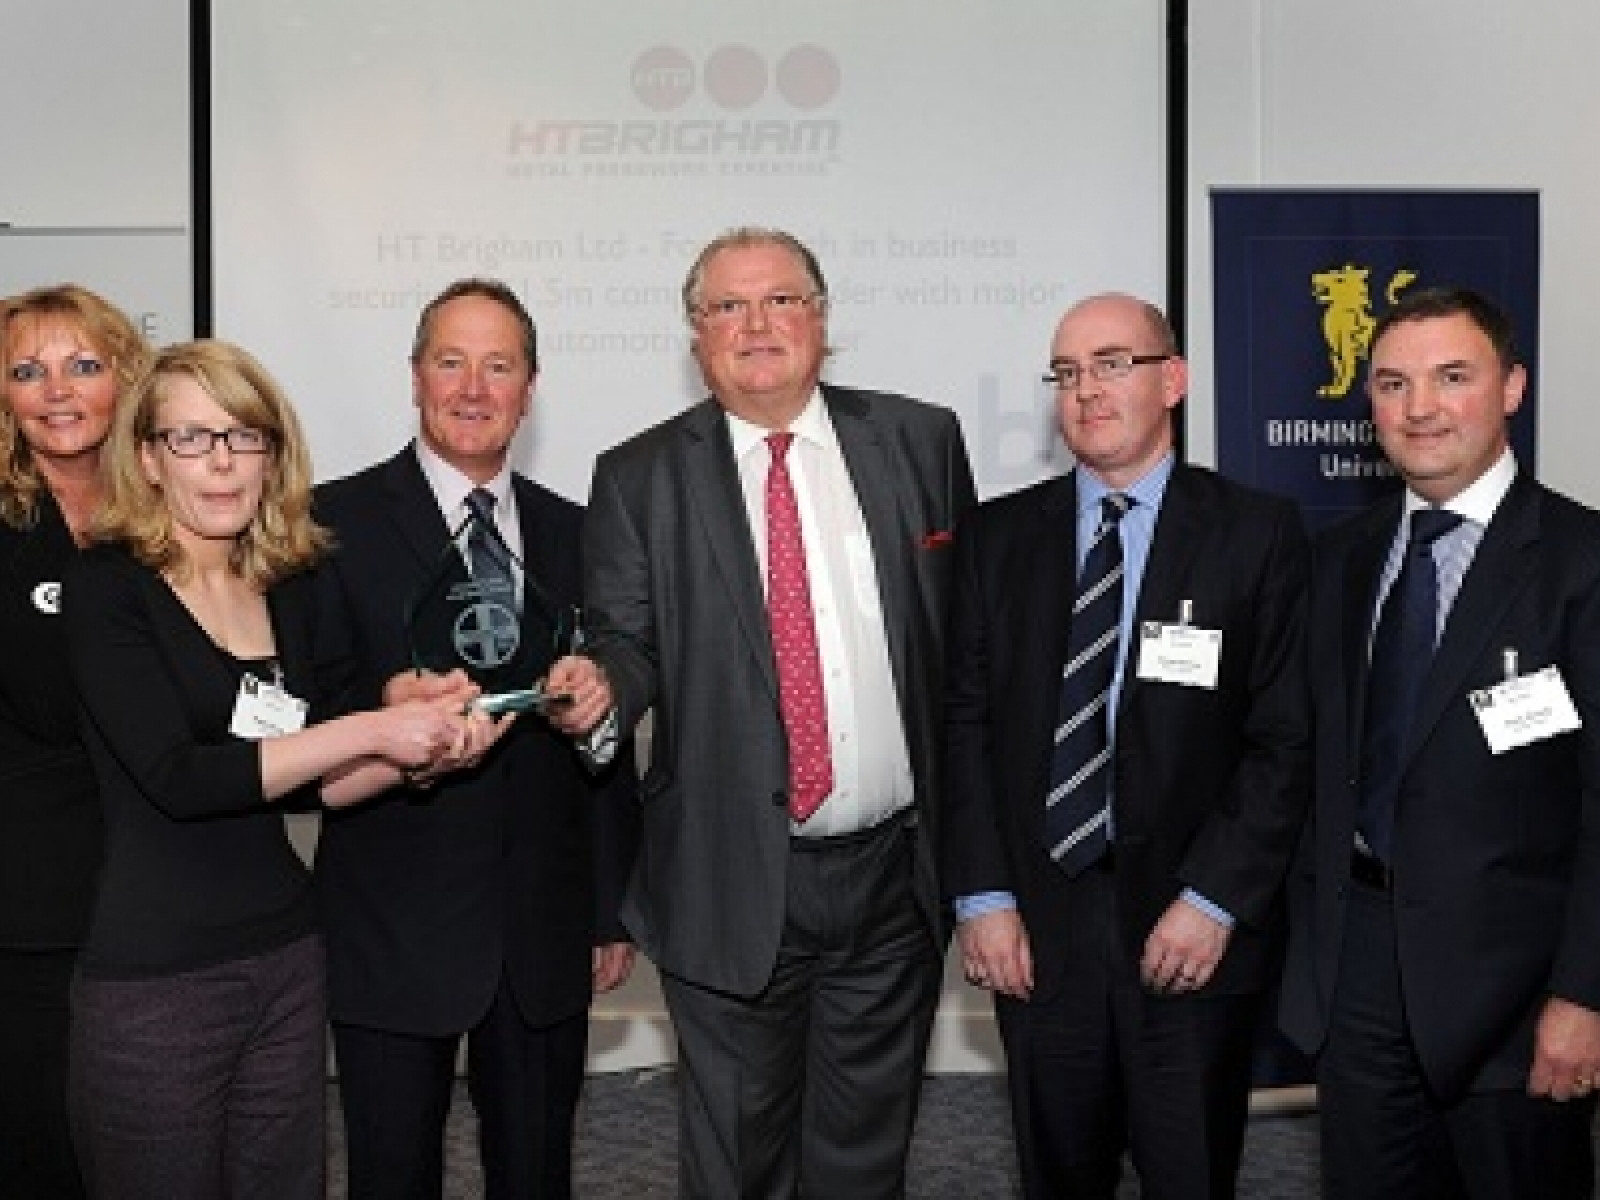 H T Brigham receive industry award for innovative...